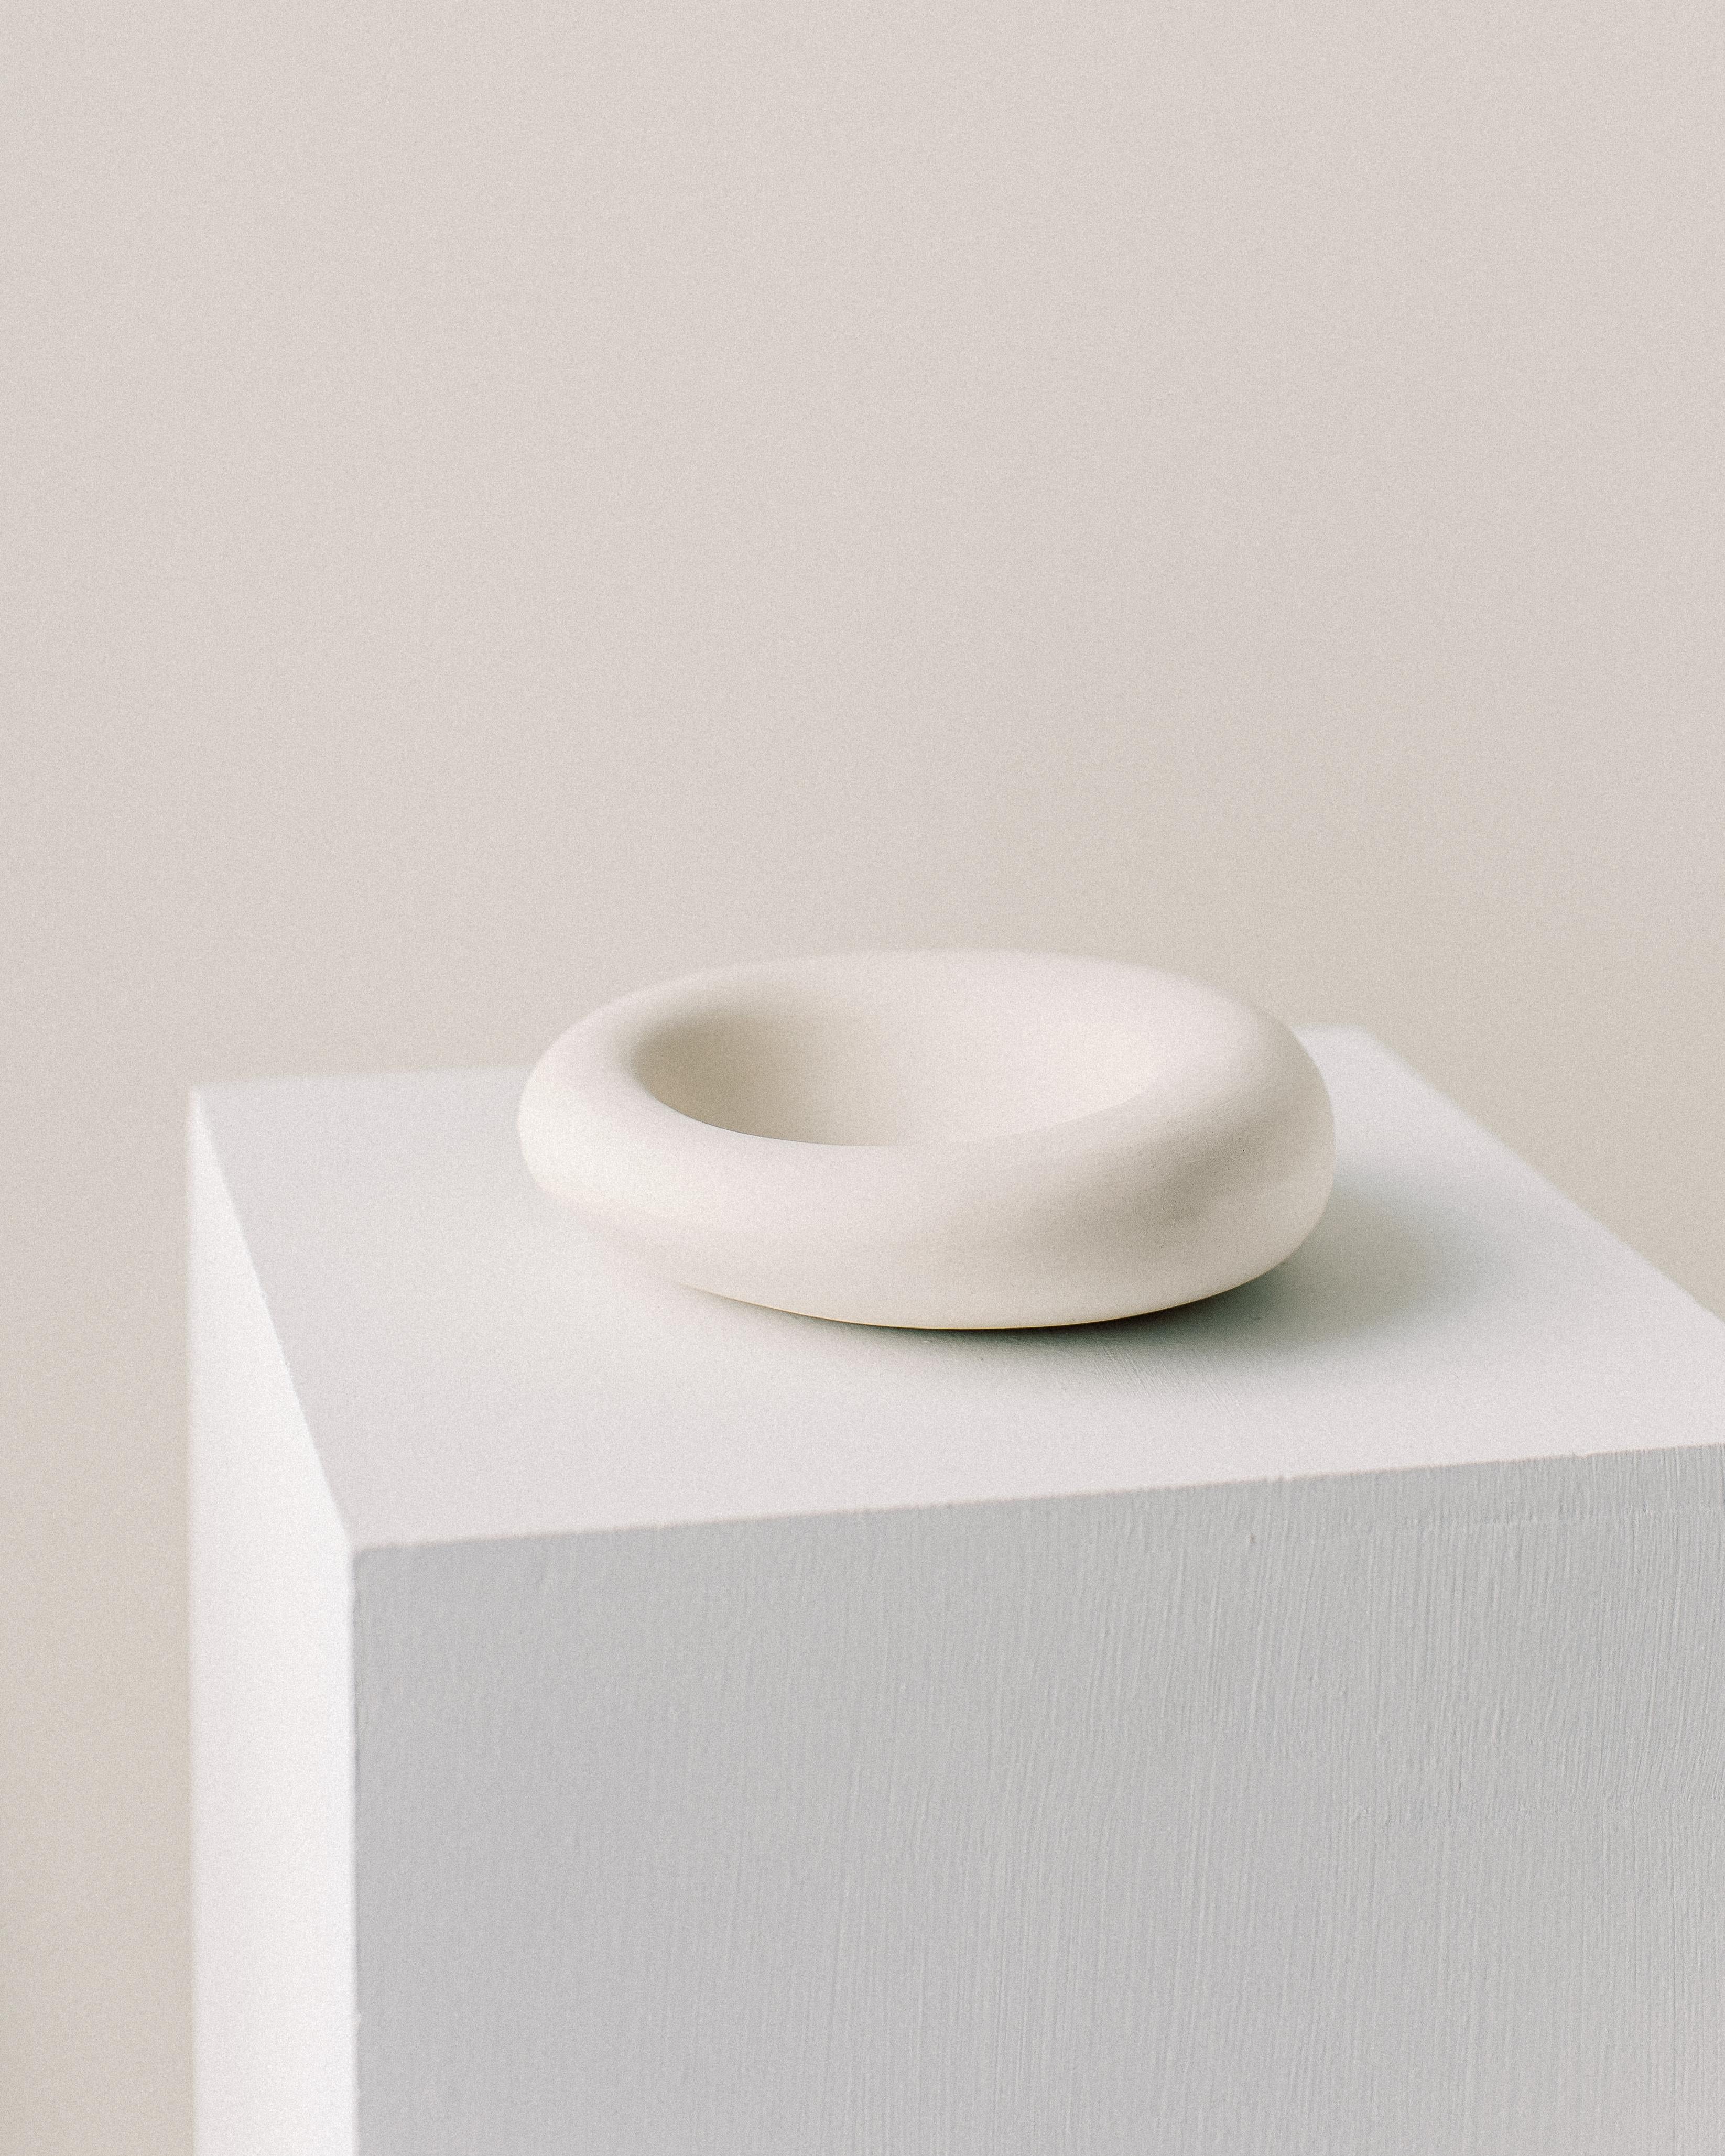 Unique heme form by Dust and Form
Dimensions: D 16.5 x 5 H cm
Materials: Porcelain

Origin Form Collection in three finishes: Hand-sanded (our Classic, smooth, bare finish) Ivory (satin white glaze) Charcoal (matte black glaze). Please contact